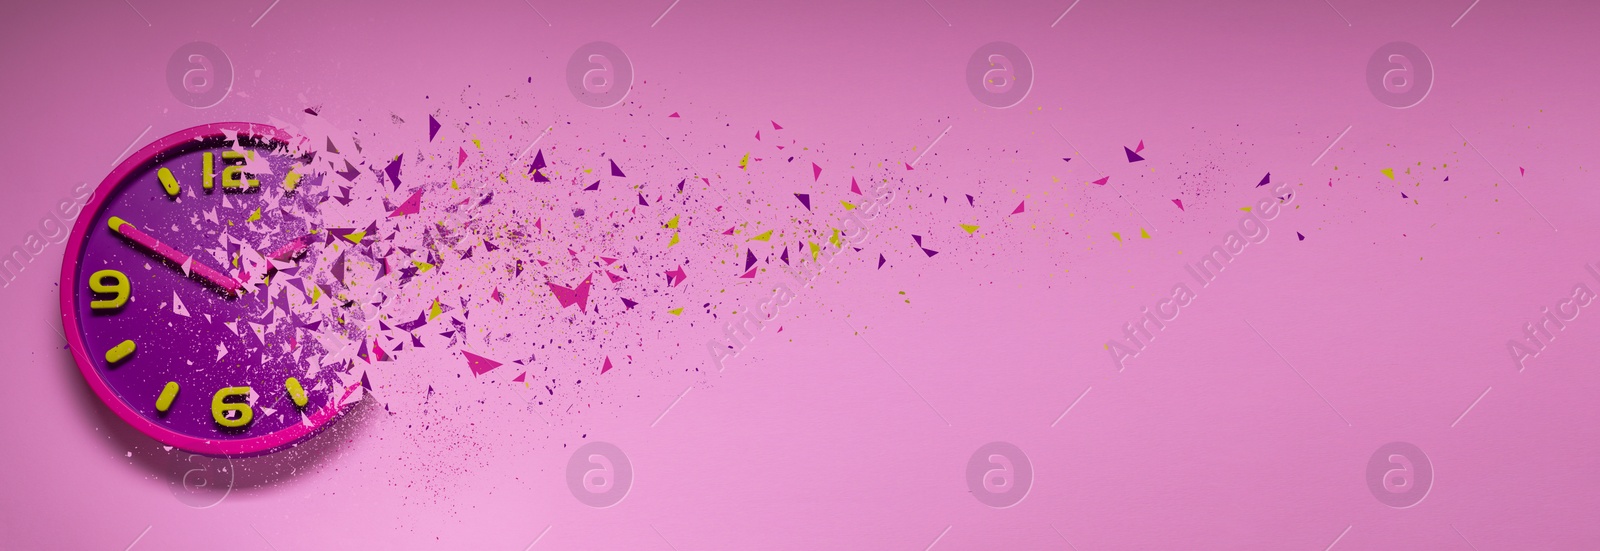 Image of Flow of time. Analog clock dissolving on pink background, space for text. Banner design